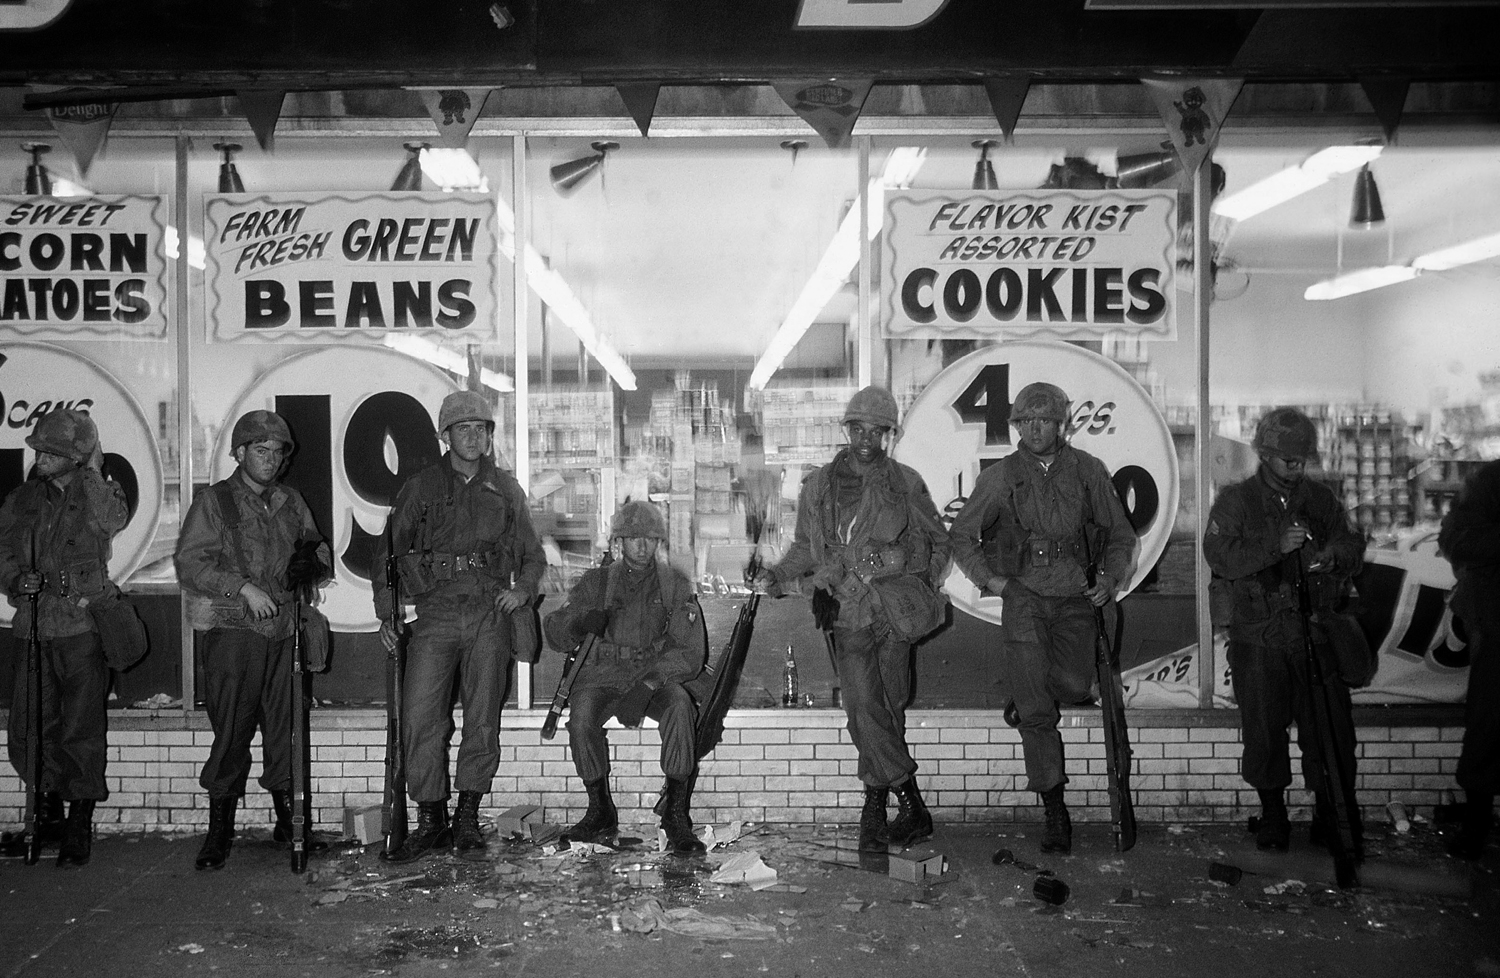 National Guardsmen in front of a store during riots following the murder of Martin Luther King Jr., Chicago, April 1968.